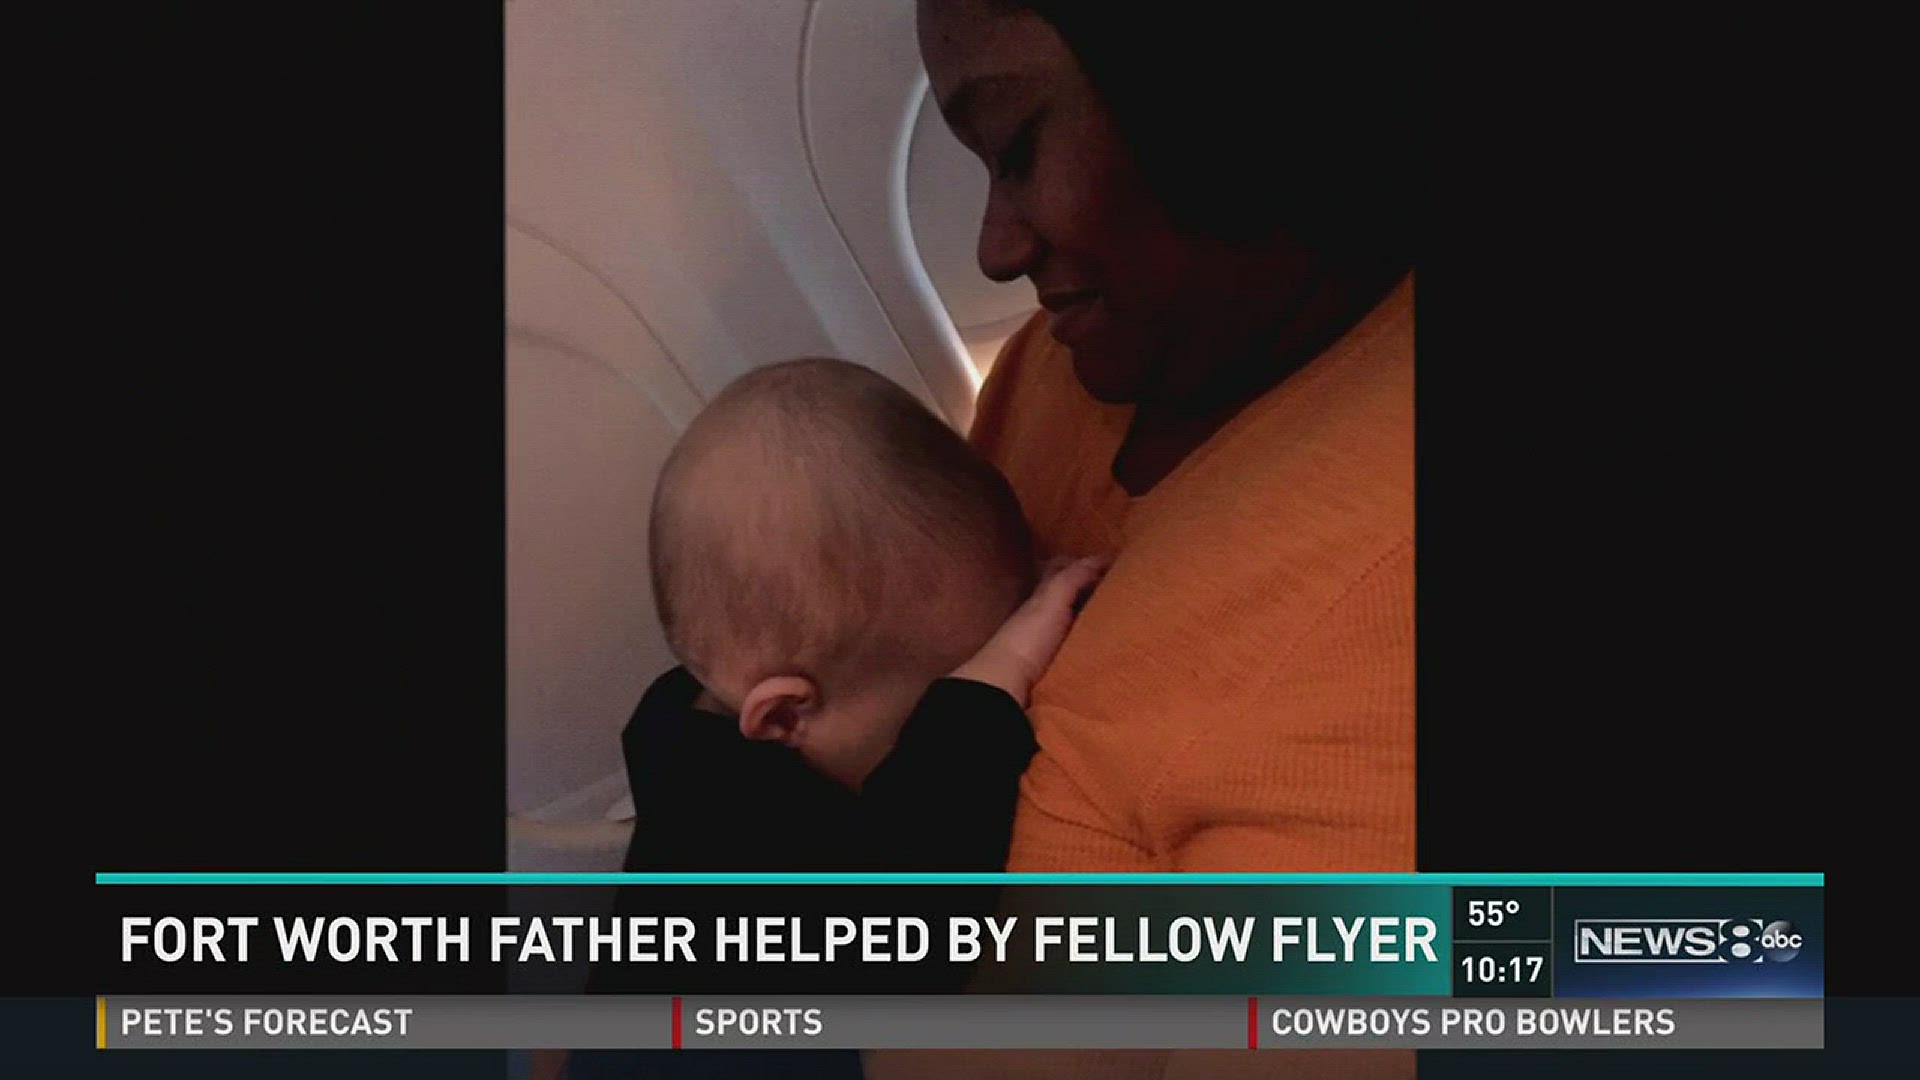 FORT WORTH FATHER HELPED BY FELLOW FLYER